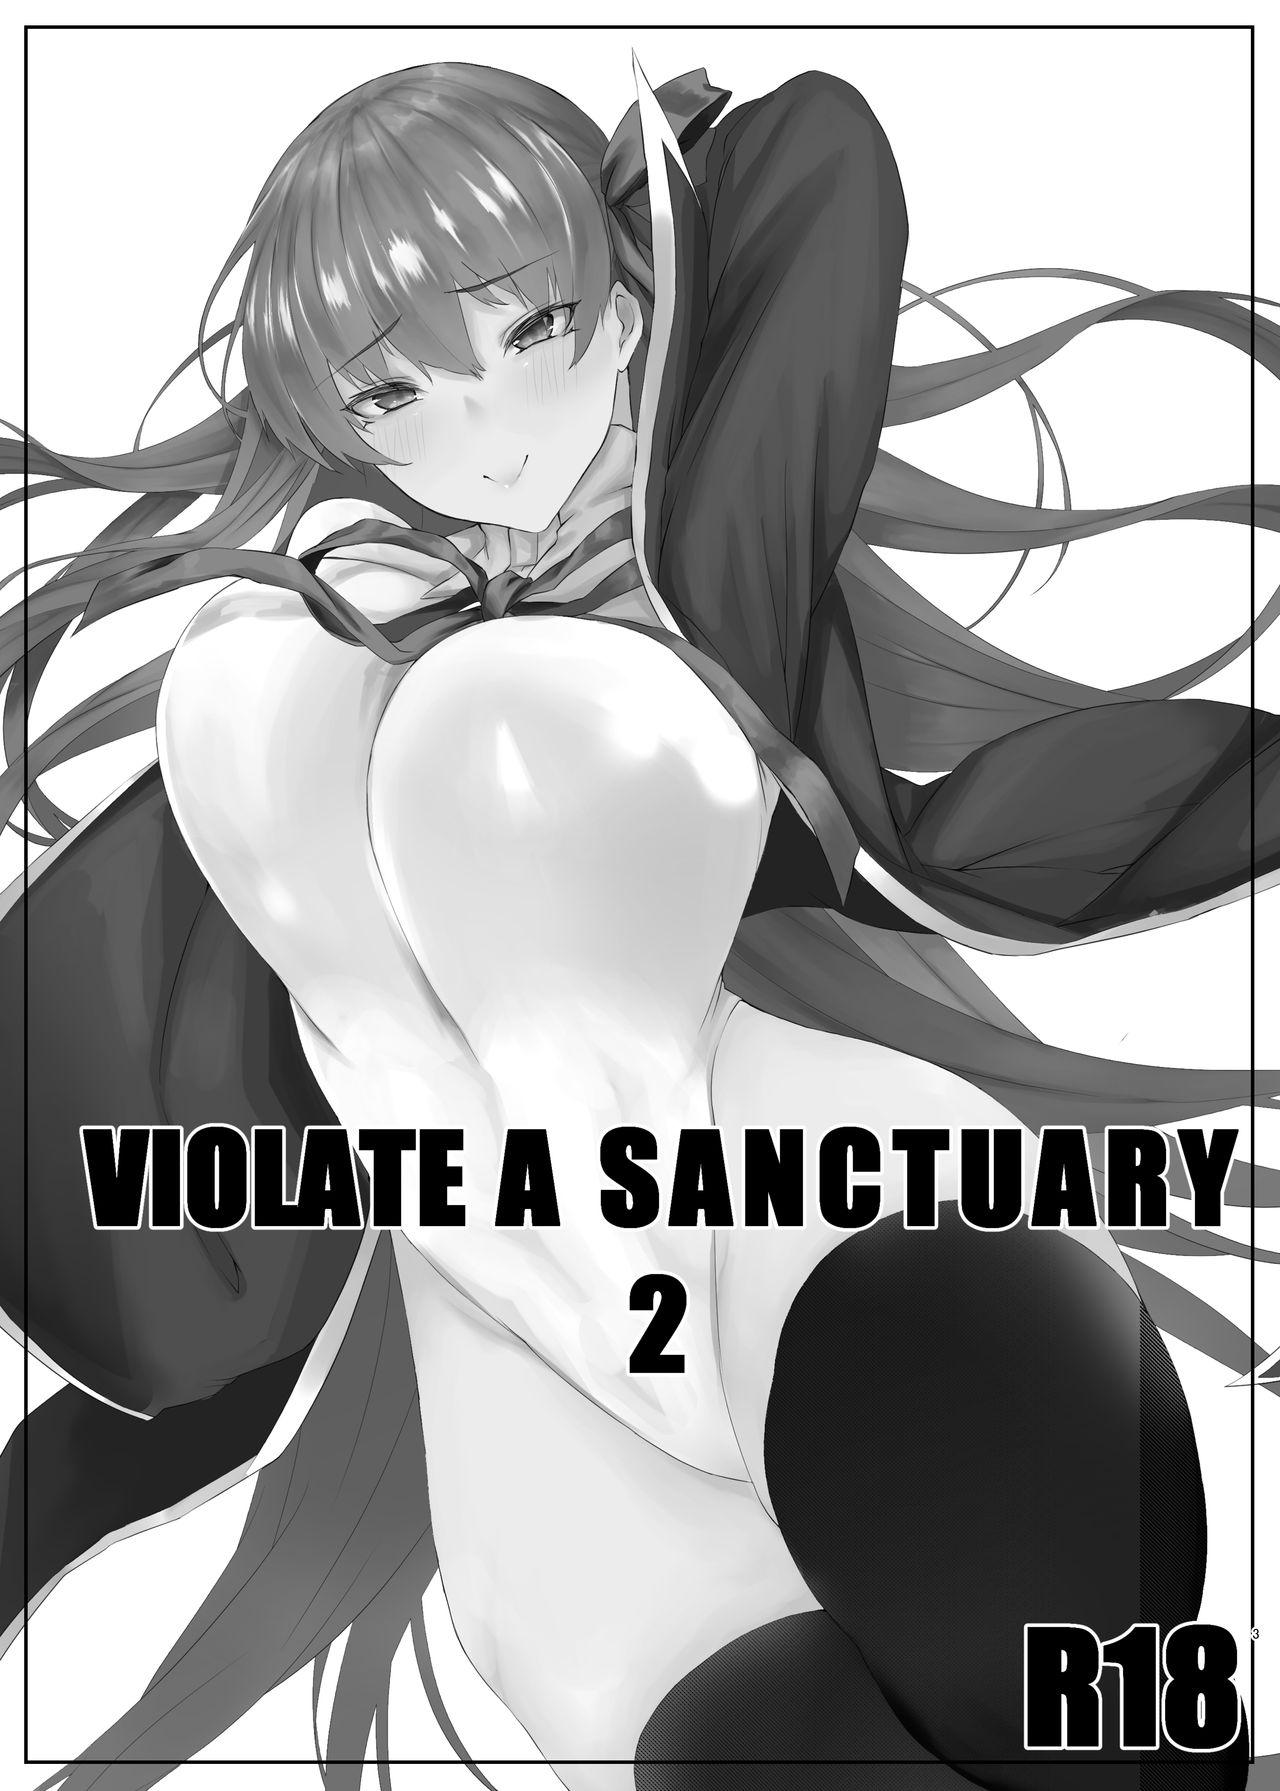 Ex Girlfriends VIOLATE A SANCTUARY 2 - Fate grand order Gaydudes - Page 3